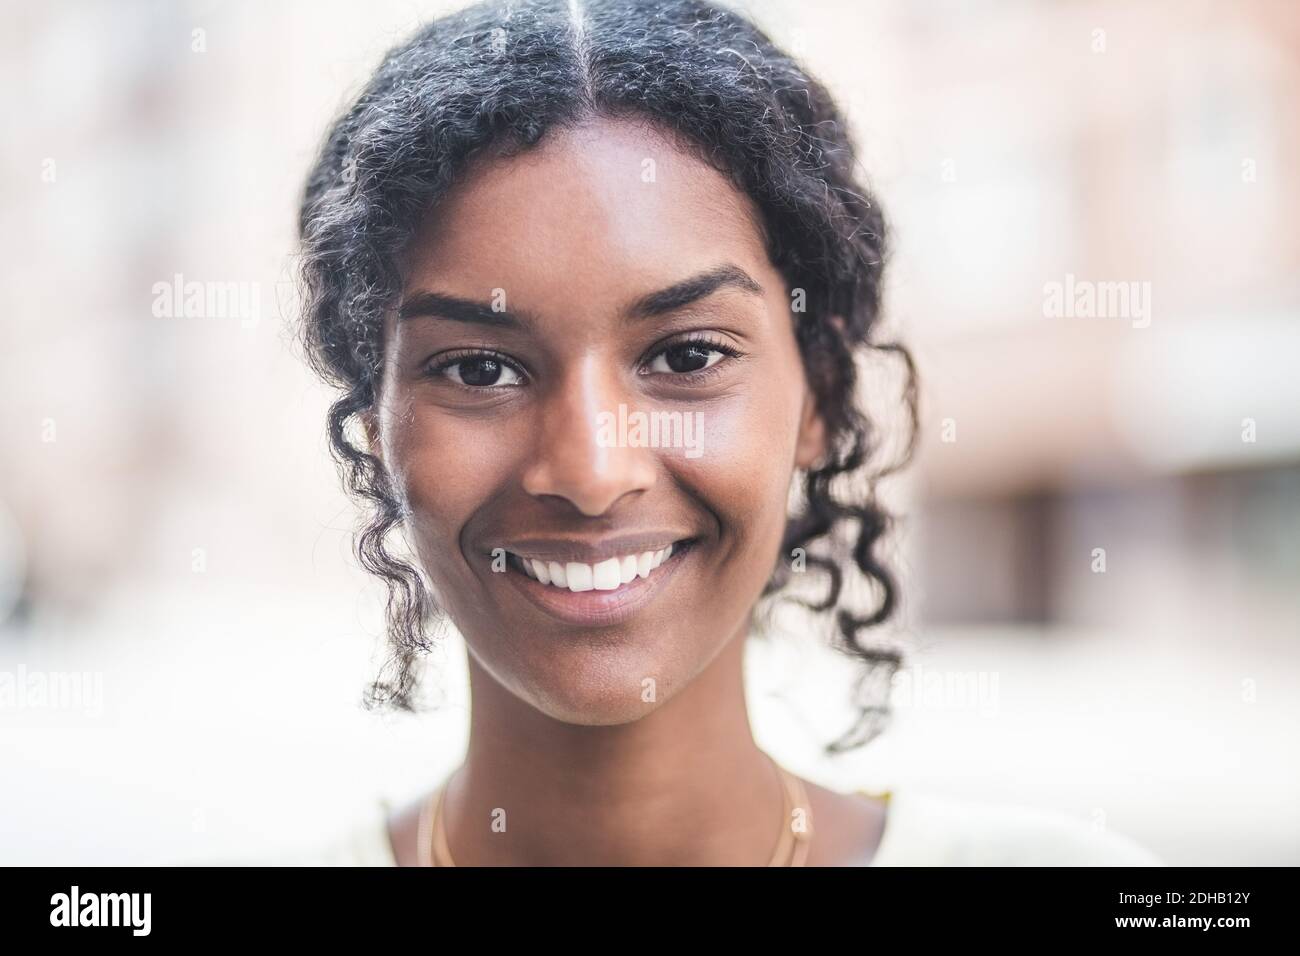 Portrait of smiling young woman in city Stock Photo